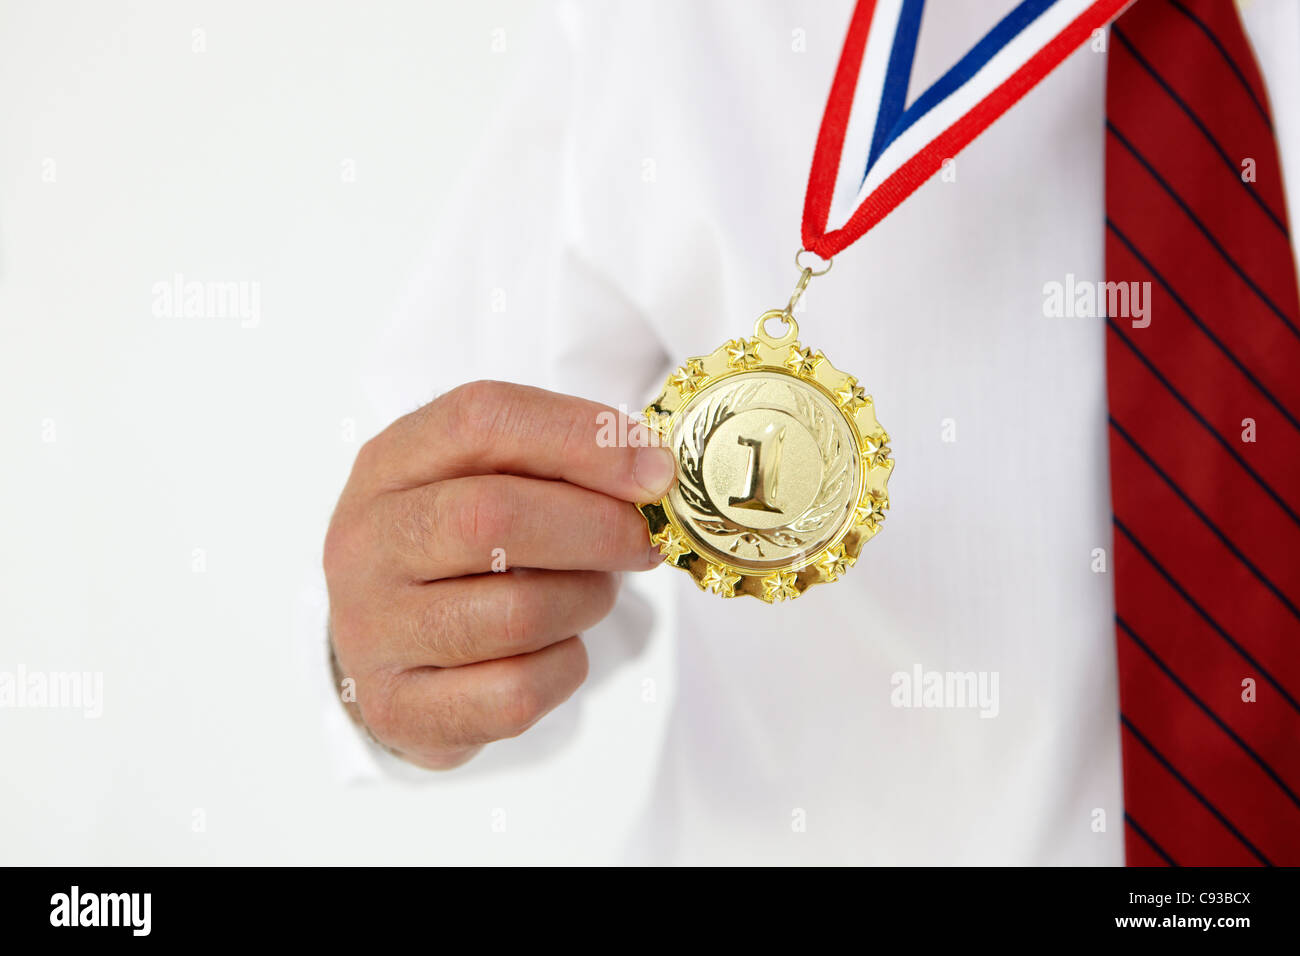 Businessman wearing medal Stock Photo